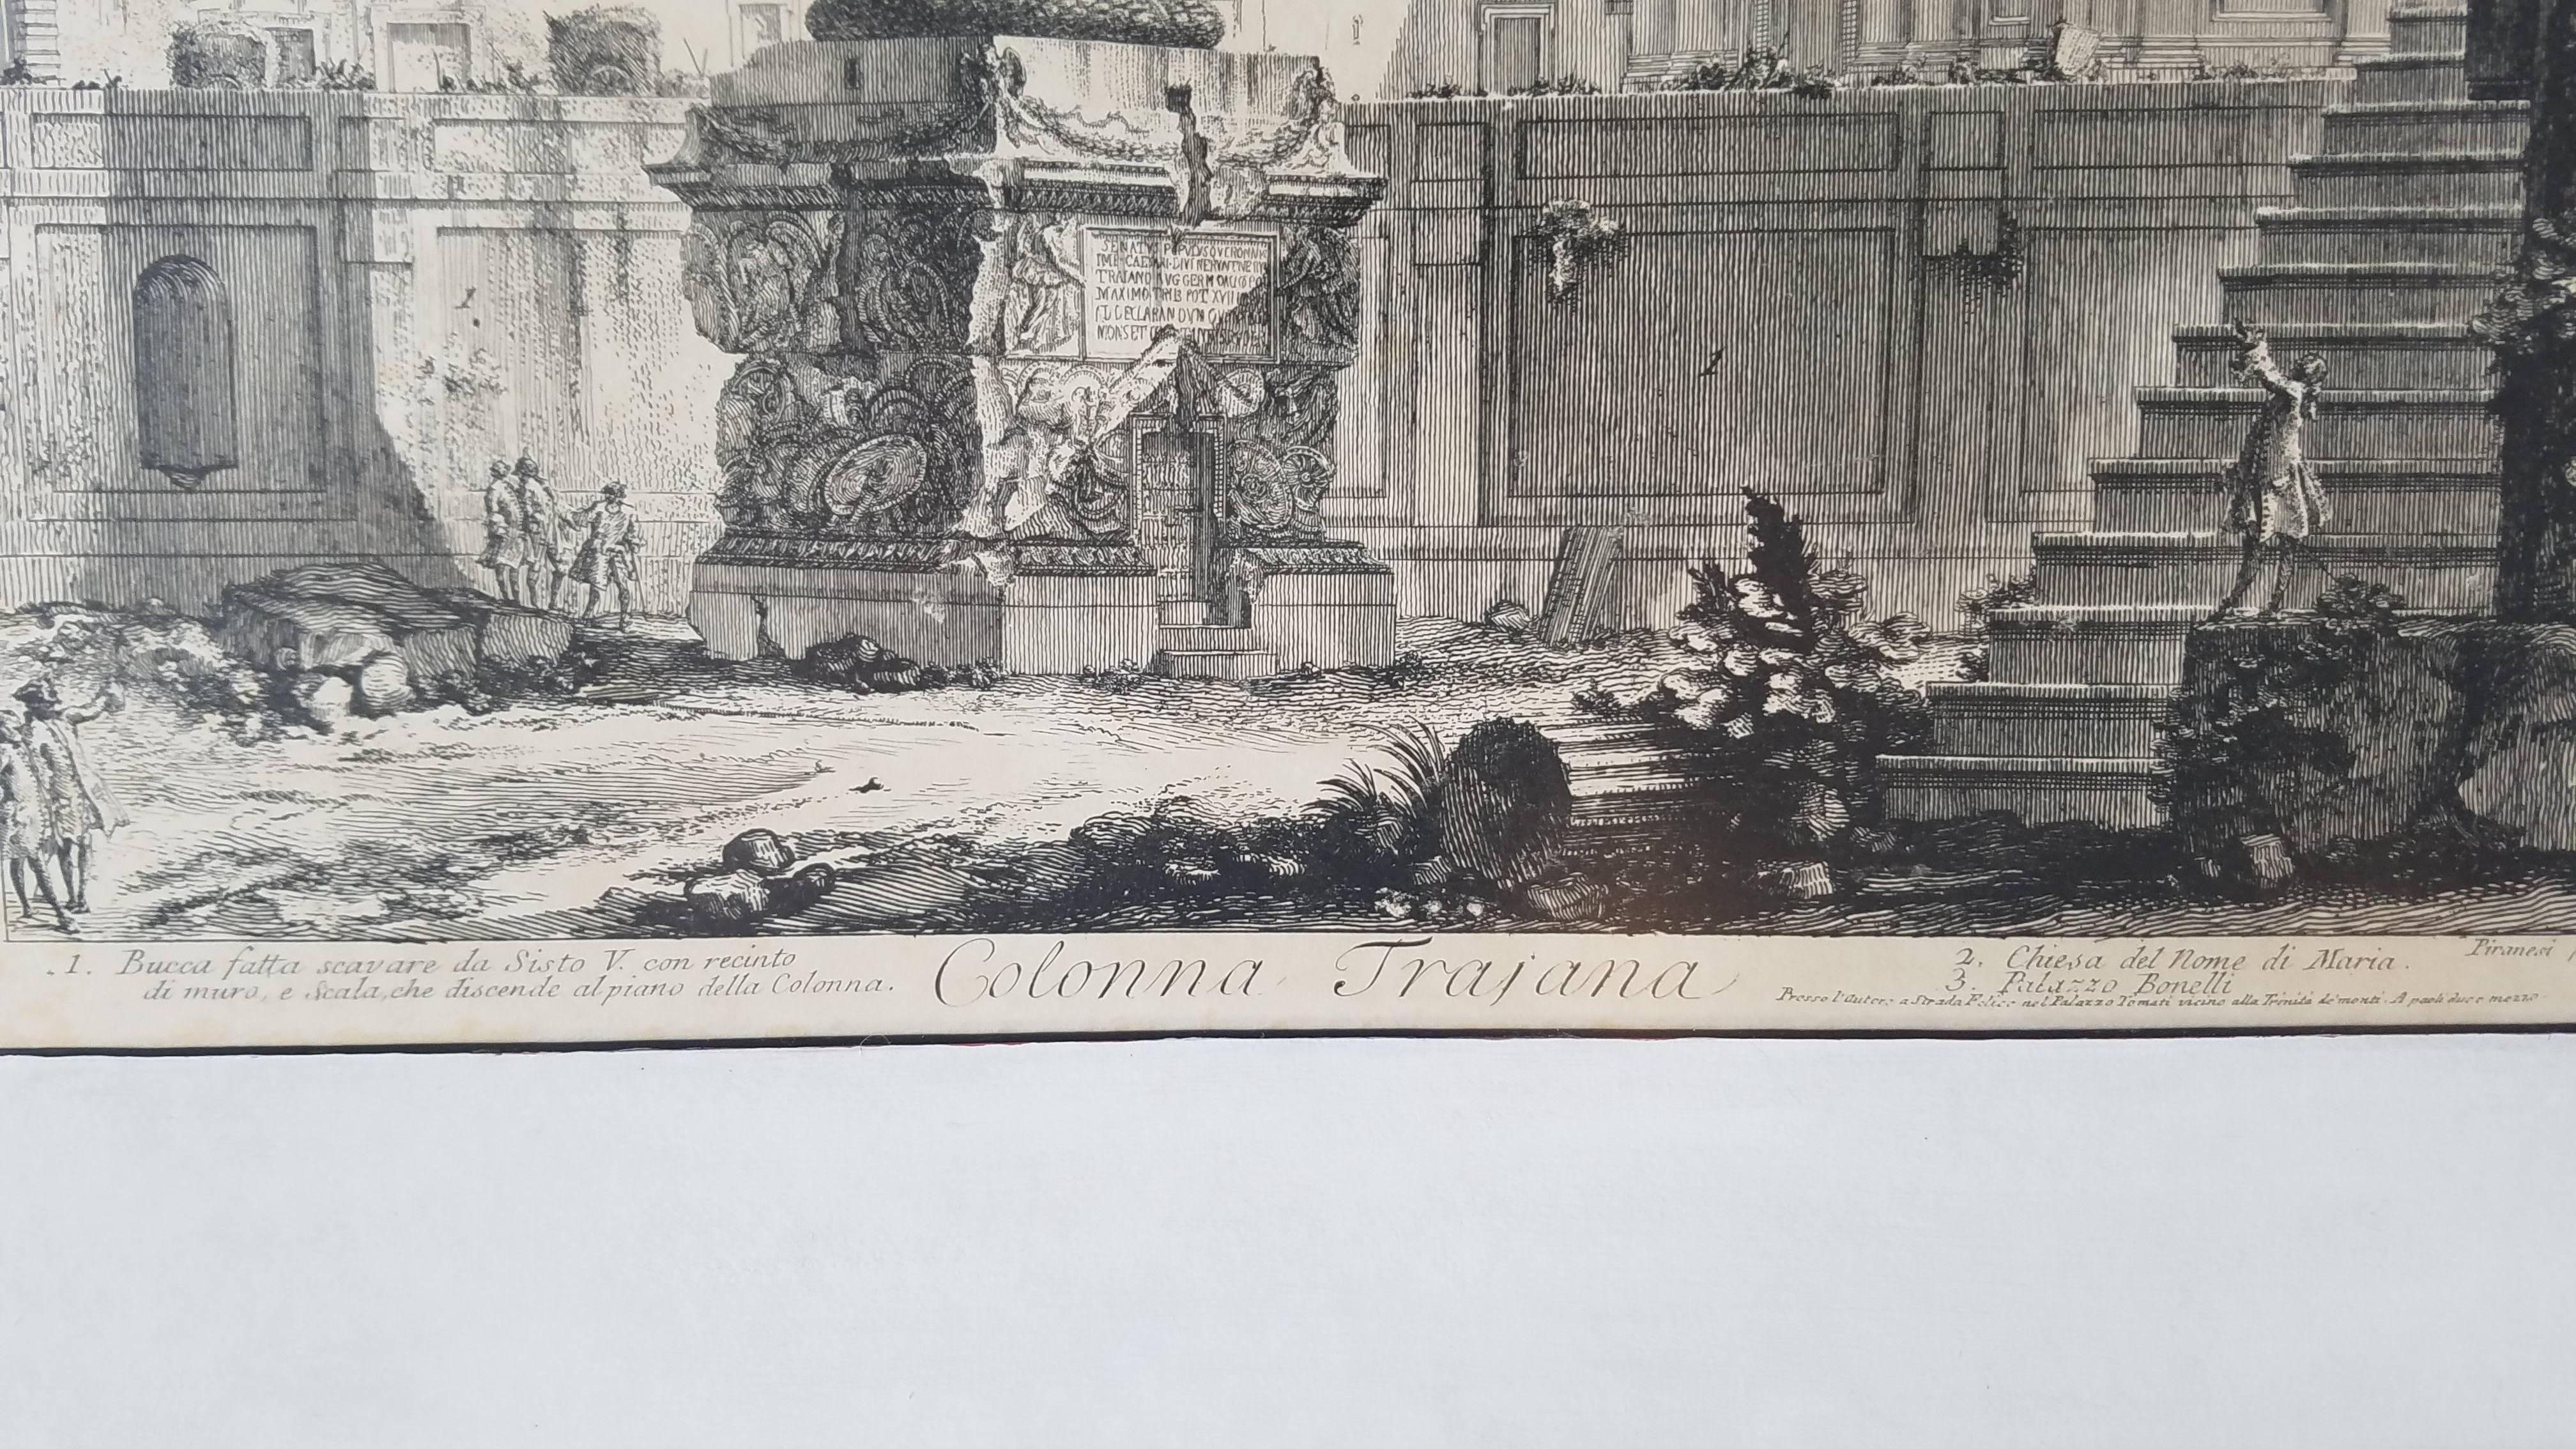 This antique lithograph of Colonna Trajana from Vedute di Roma was originally etched by Piranesi in Italy 1720-1778 framed in white gold frame is backed in a modern metallic polka dot paper. Giovanni Piranesi was an Italian Etcher, Archeologist,